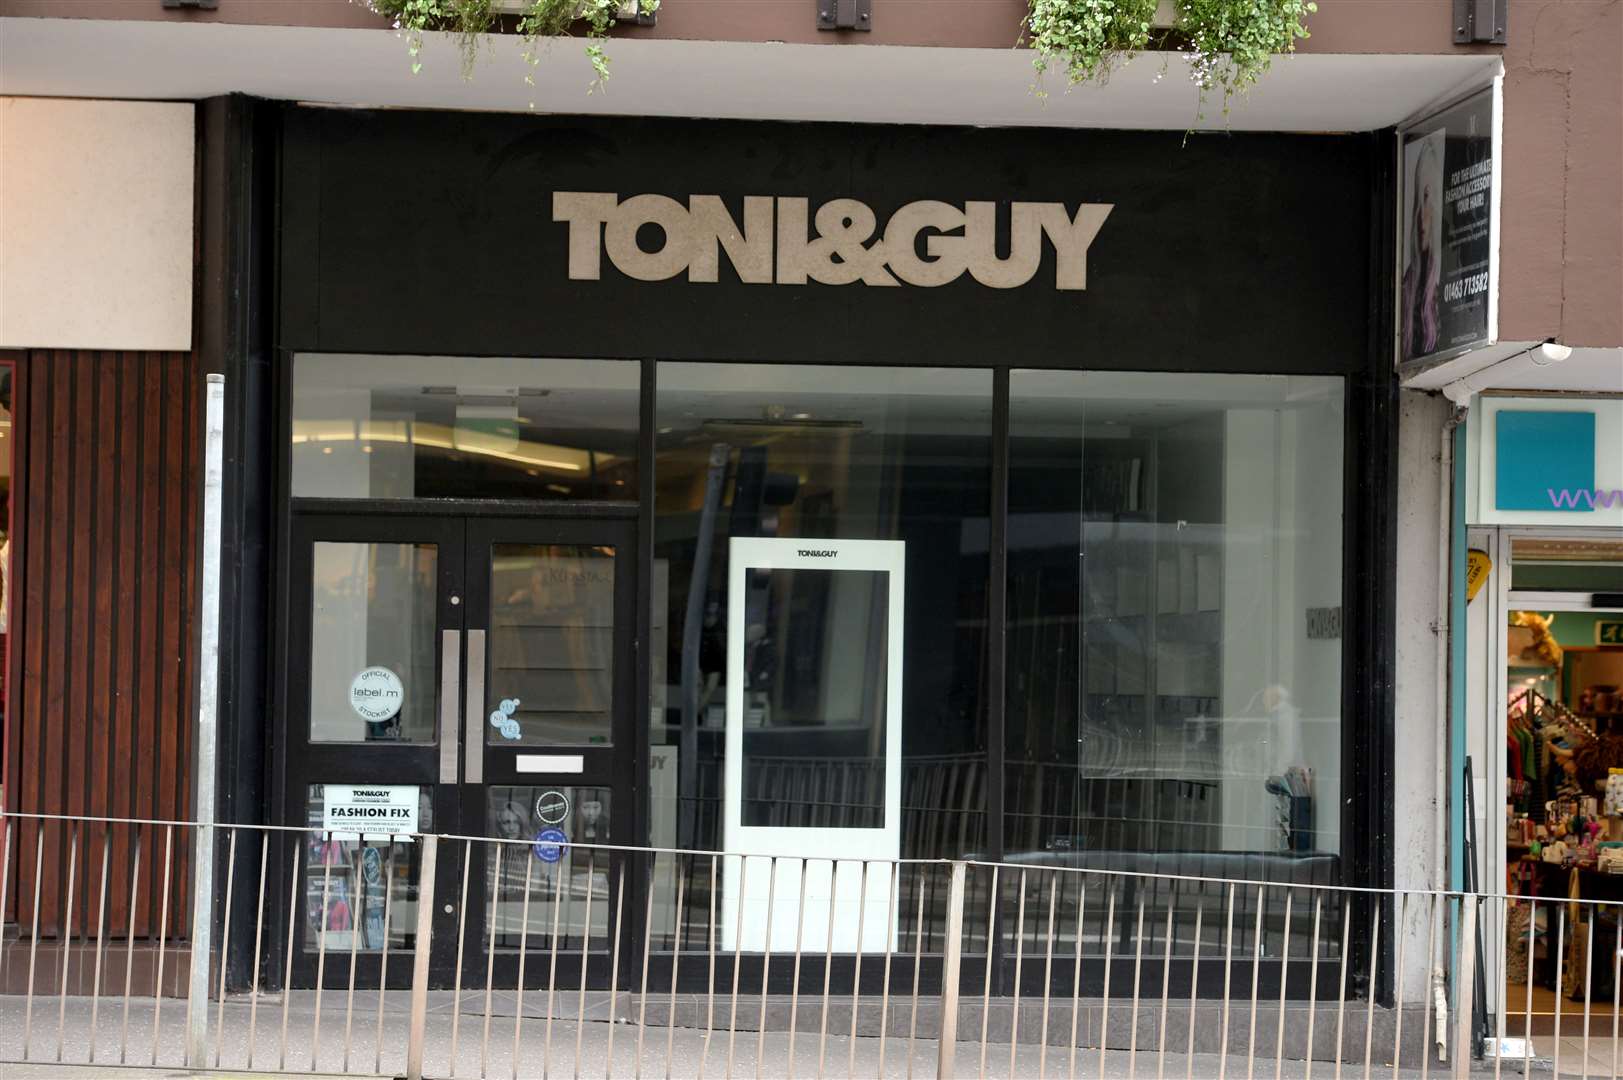 The Toni & Guy salon in Inverness's Bridge Street closed suddenly earlier this summer.